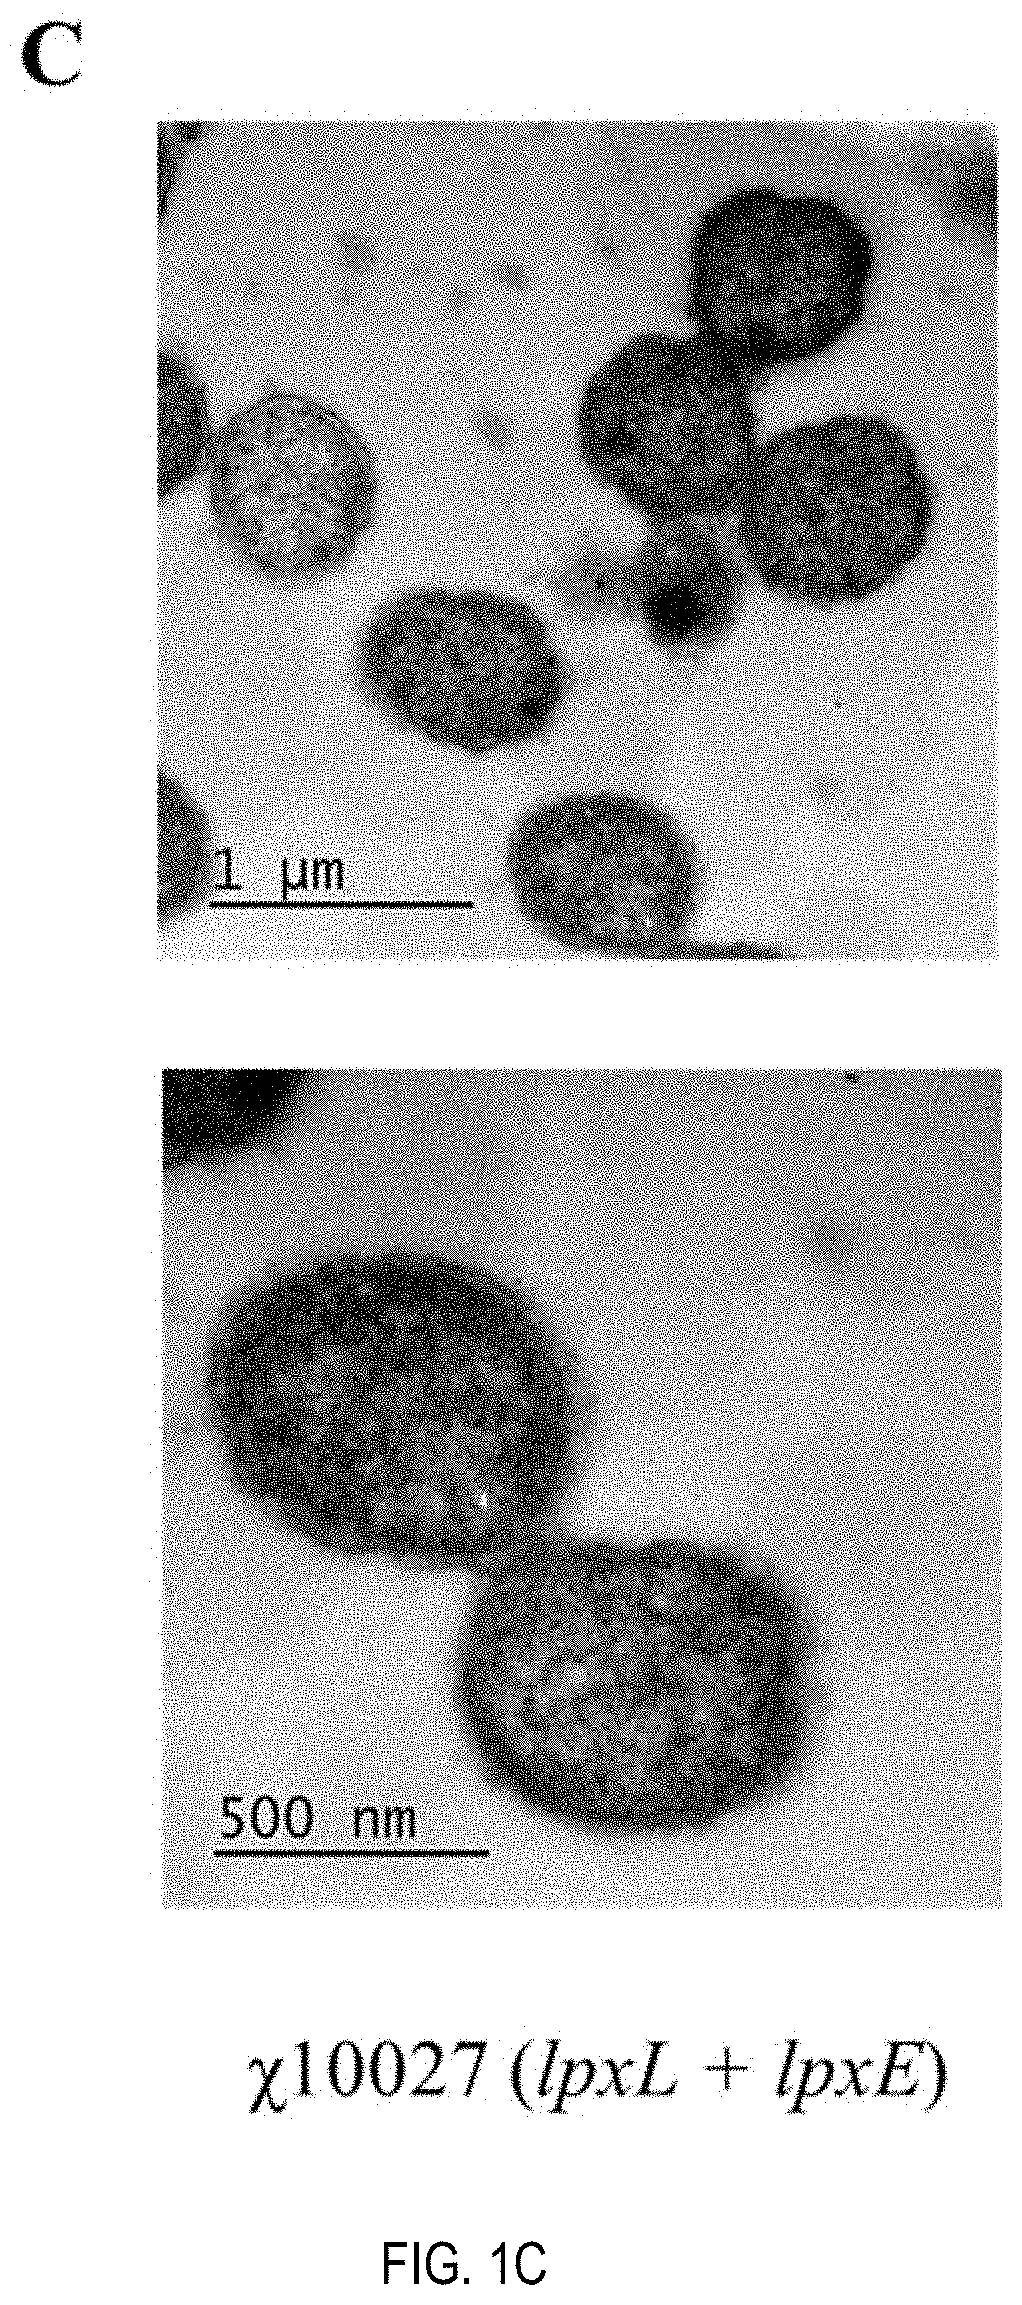 Self-adjuvanting yersinia outer membrane vesicle as a vaccine against plague, anthrax and pseudomonas infection